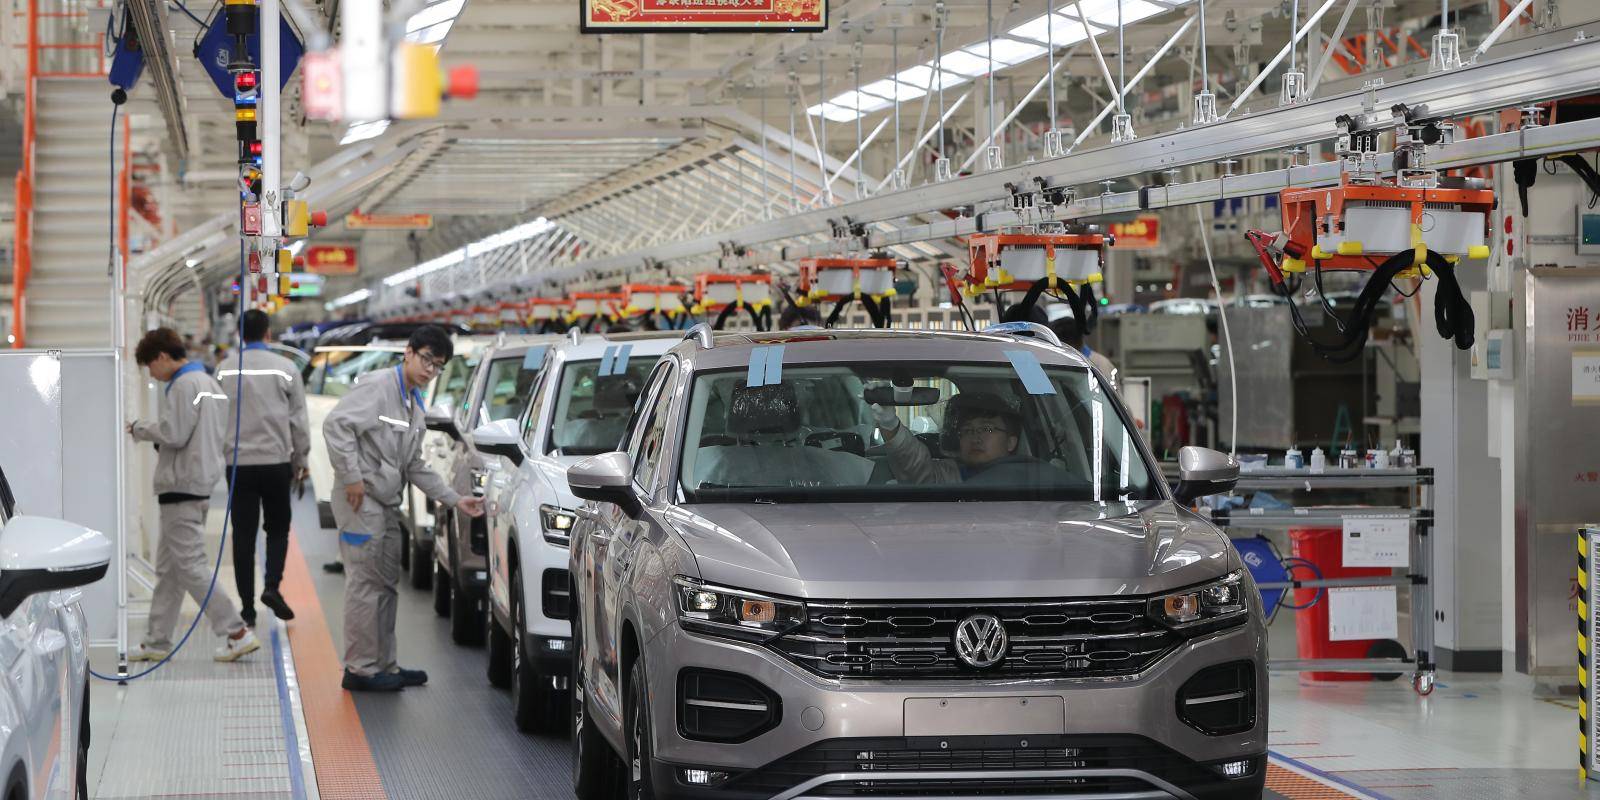 Image shows workers and vehicles at a VW assembly line in Tianjin, China